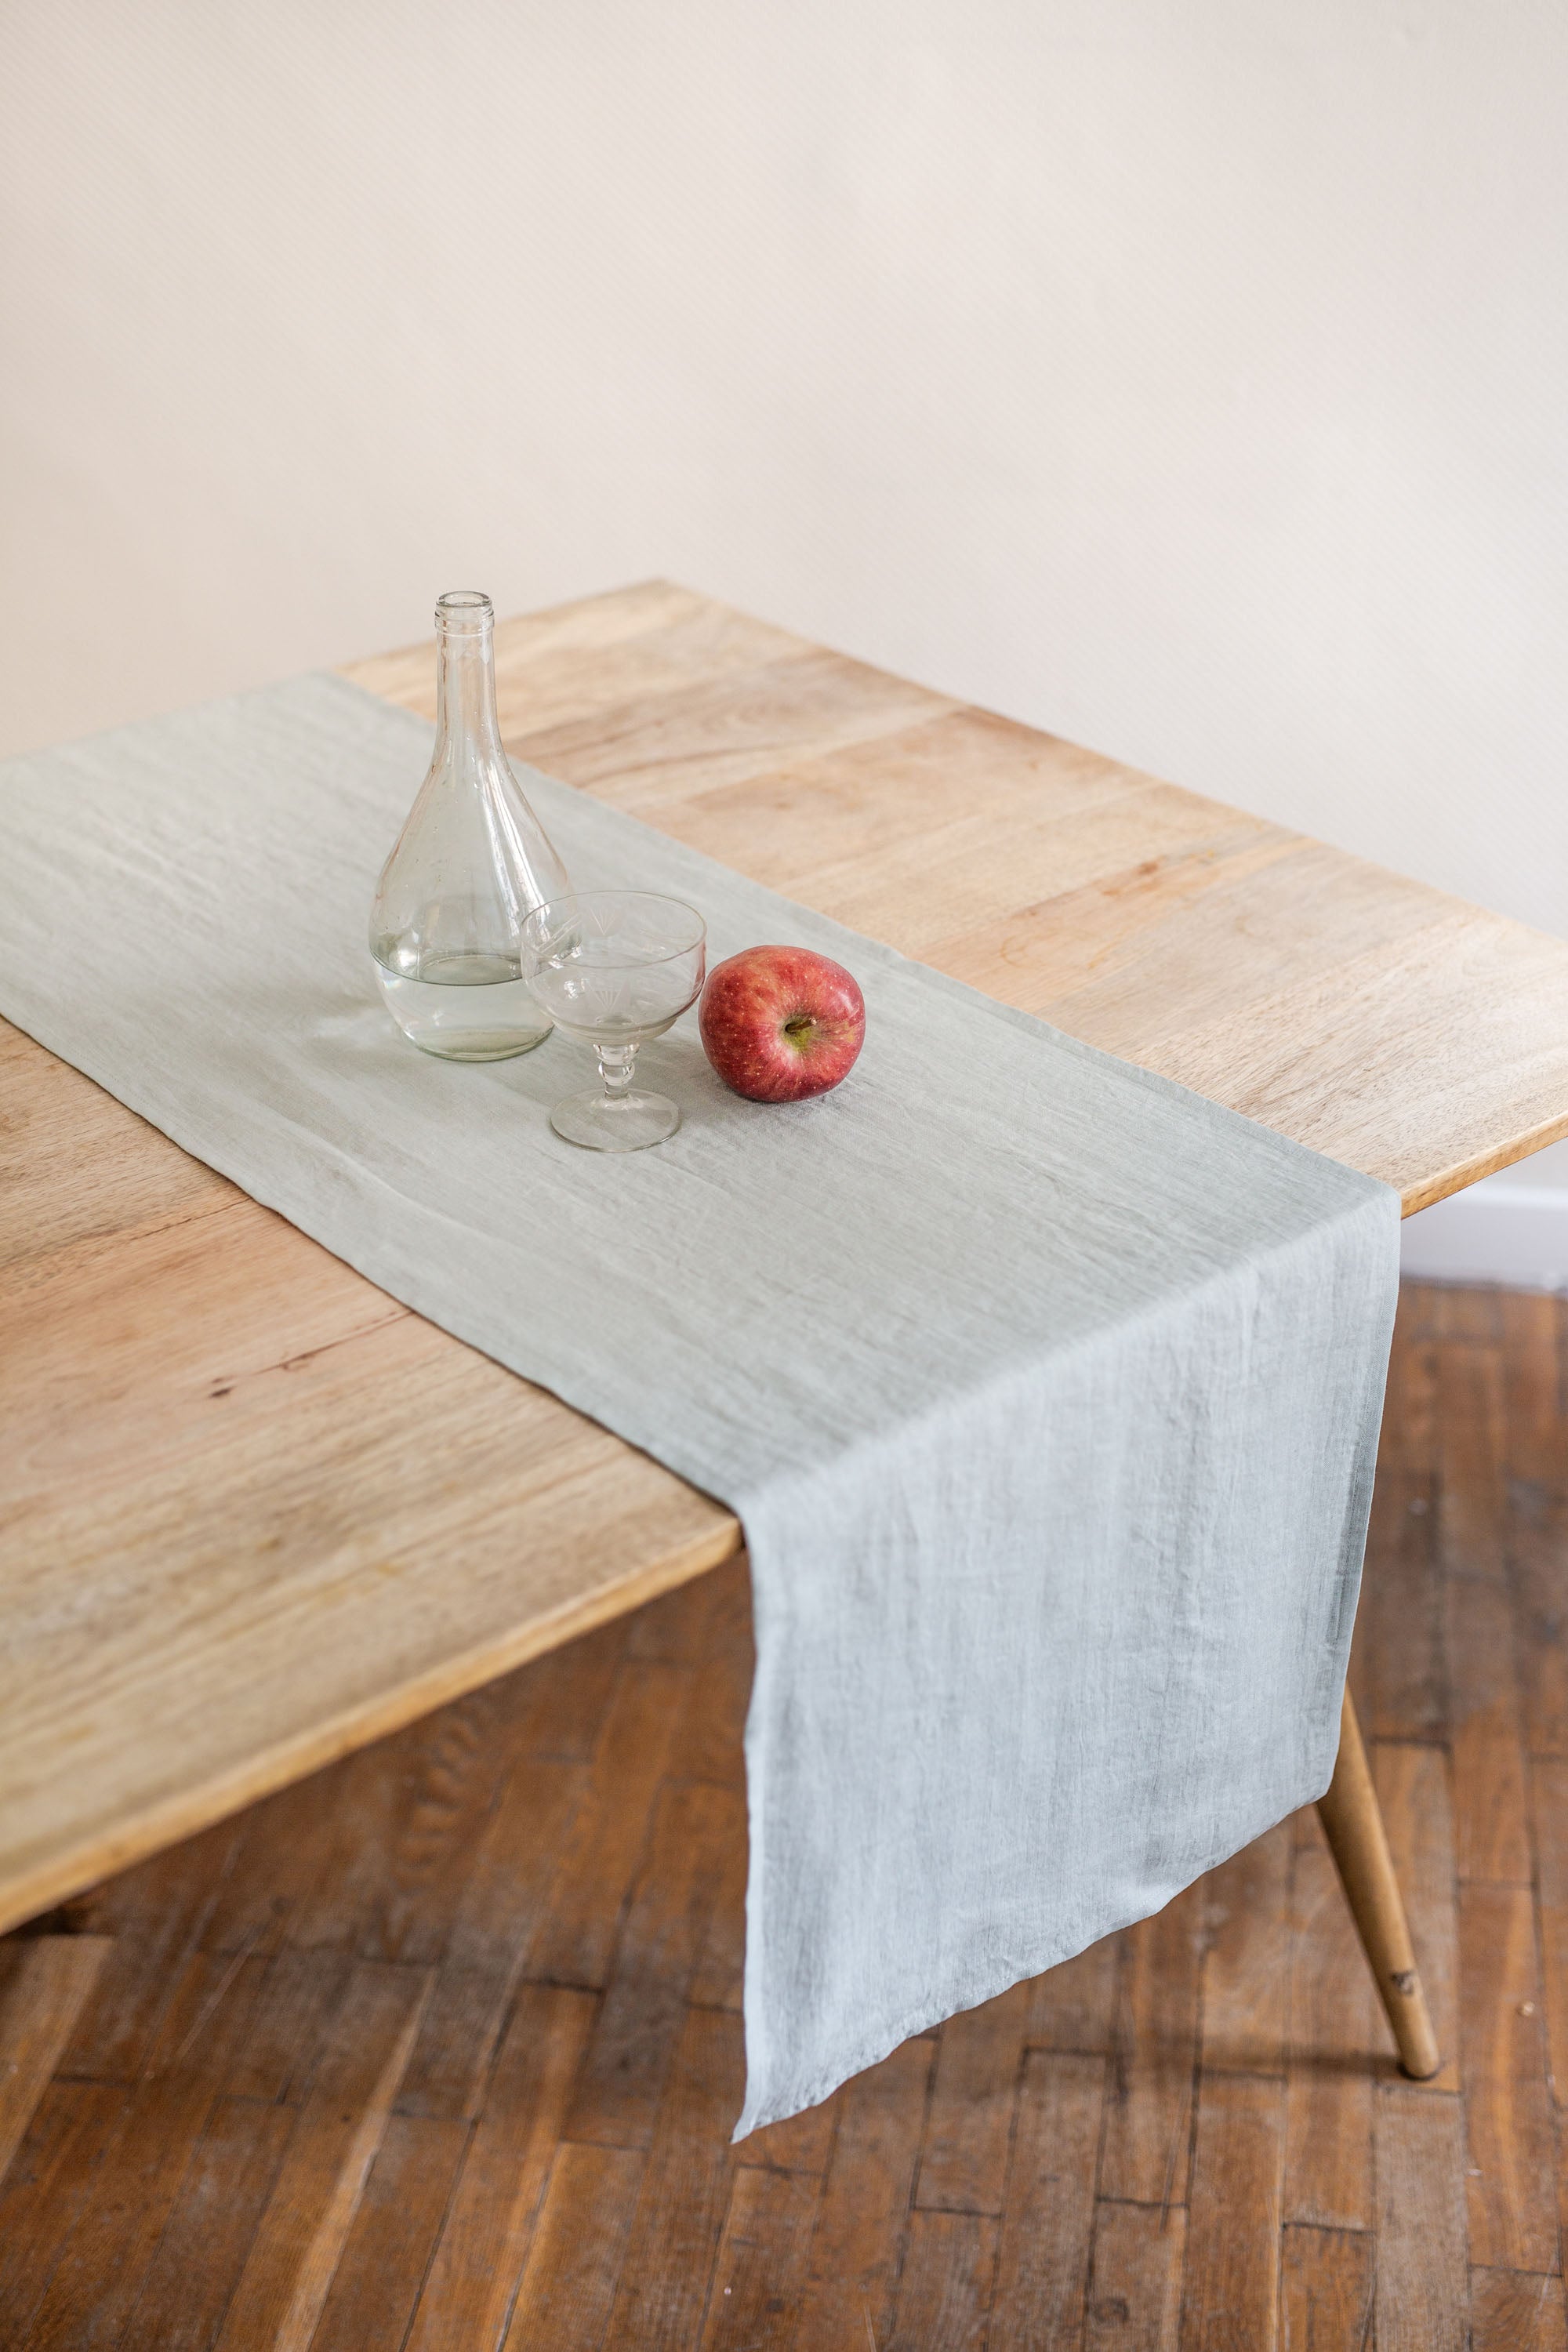 Rustic Dinner Table With Sage Green Linen Table Runner By AmourlInen